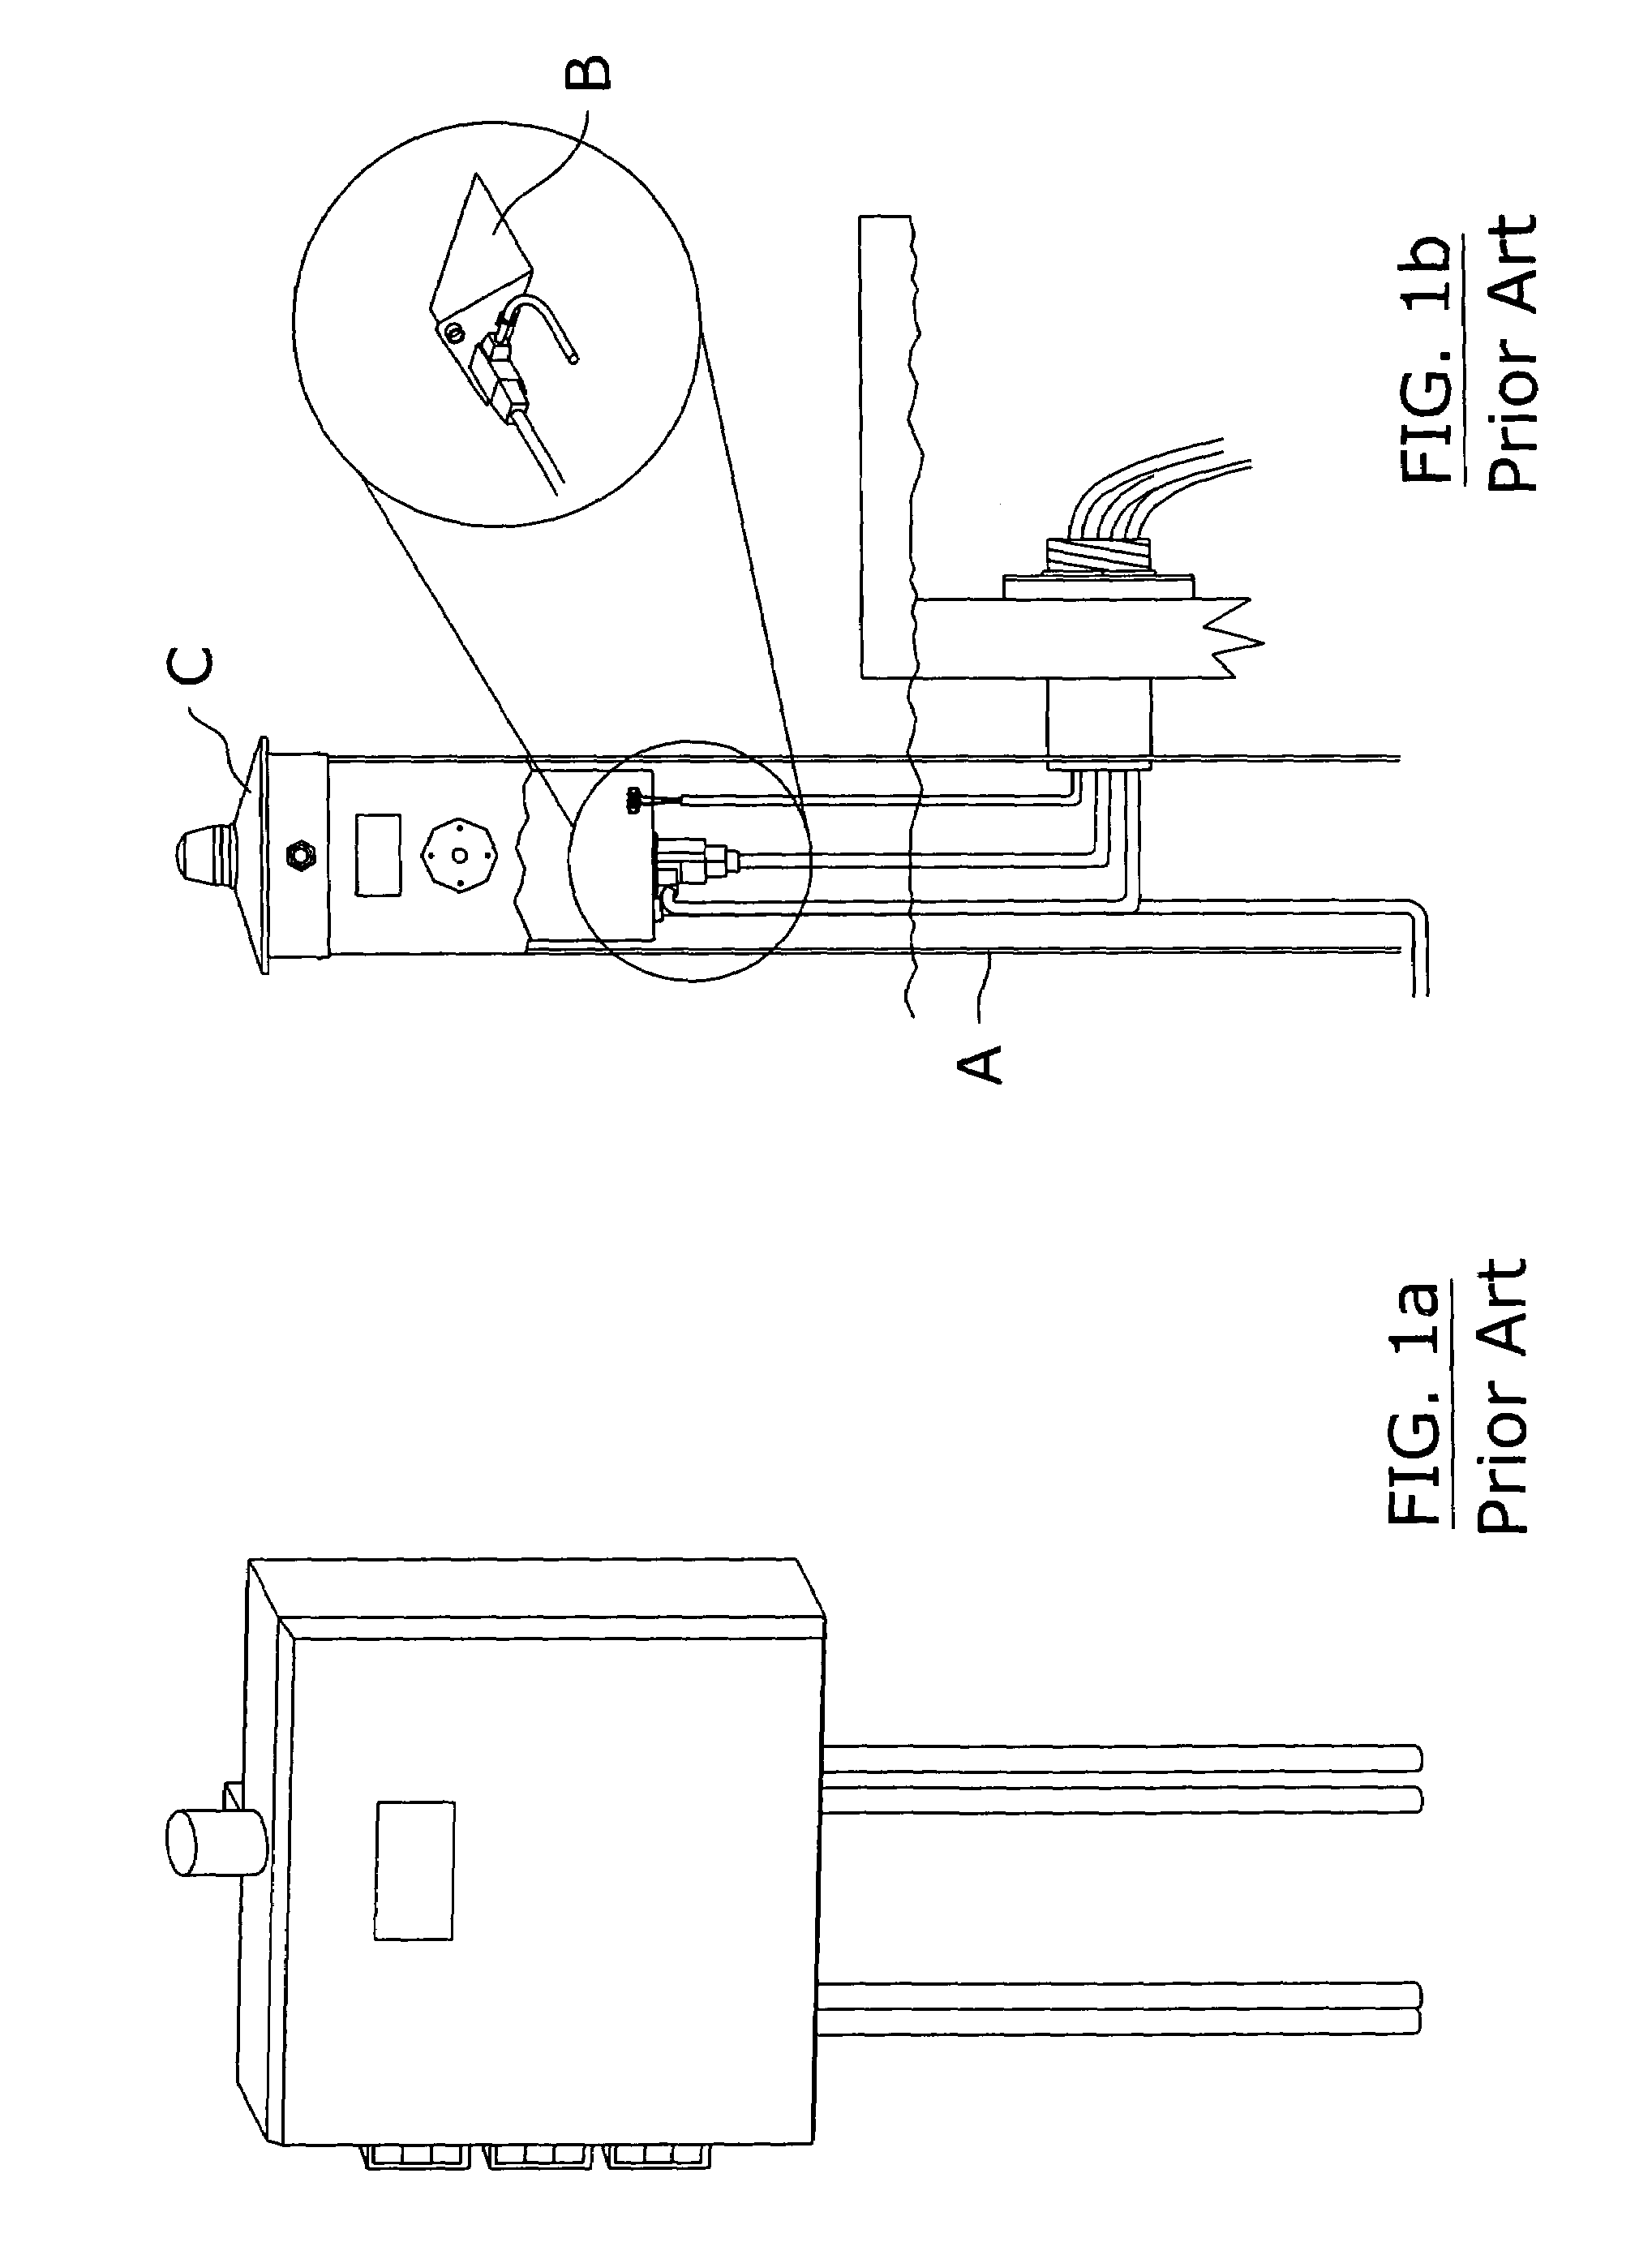 Electrical enclosure system